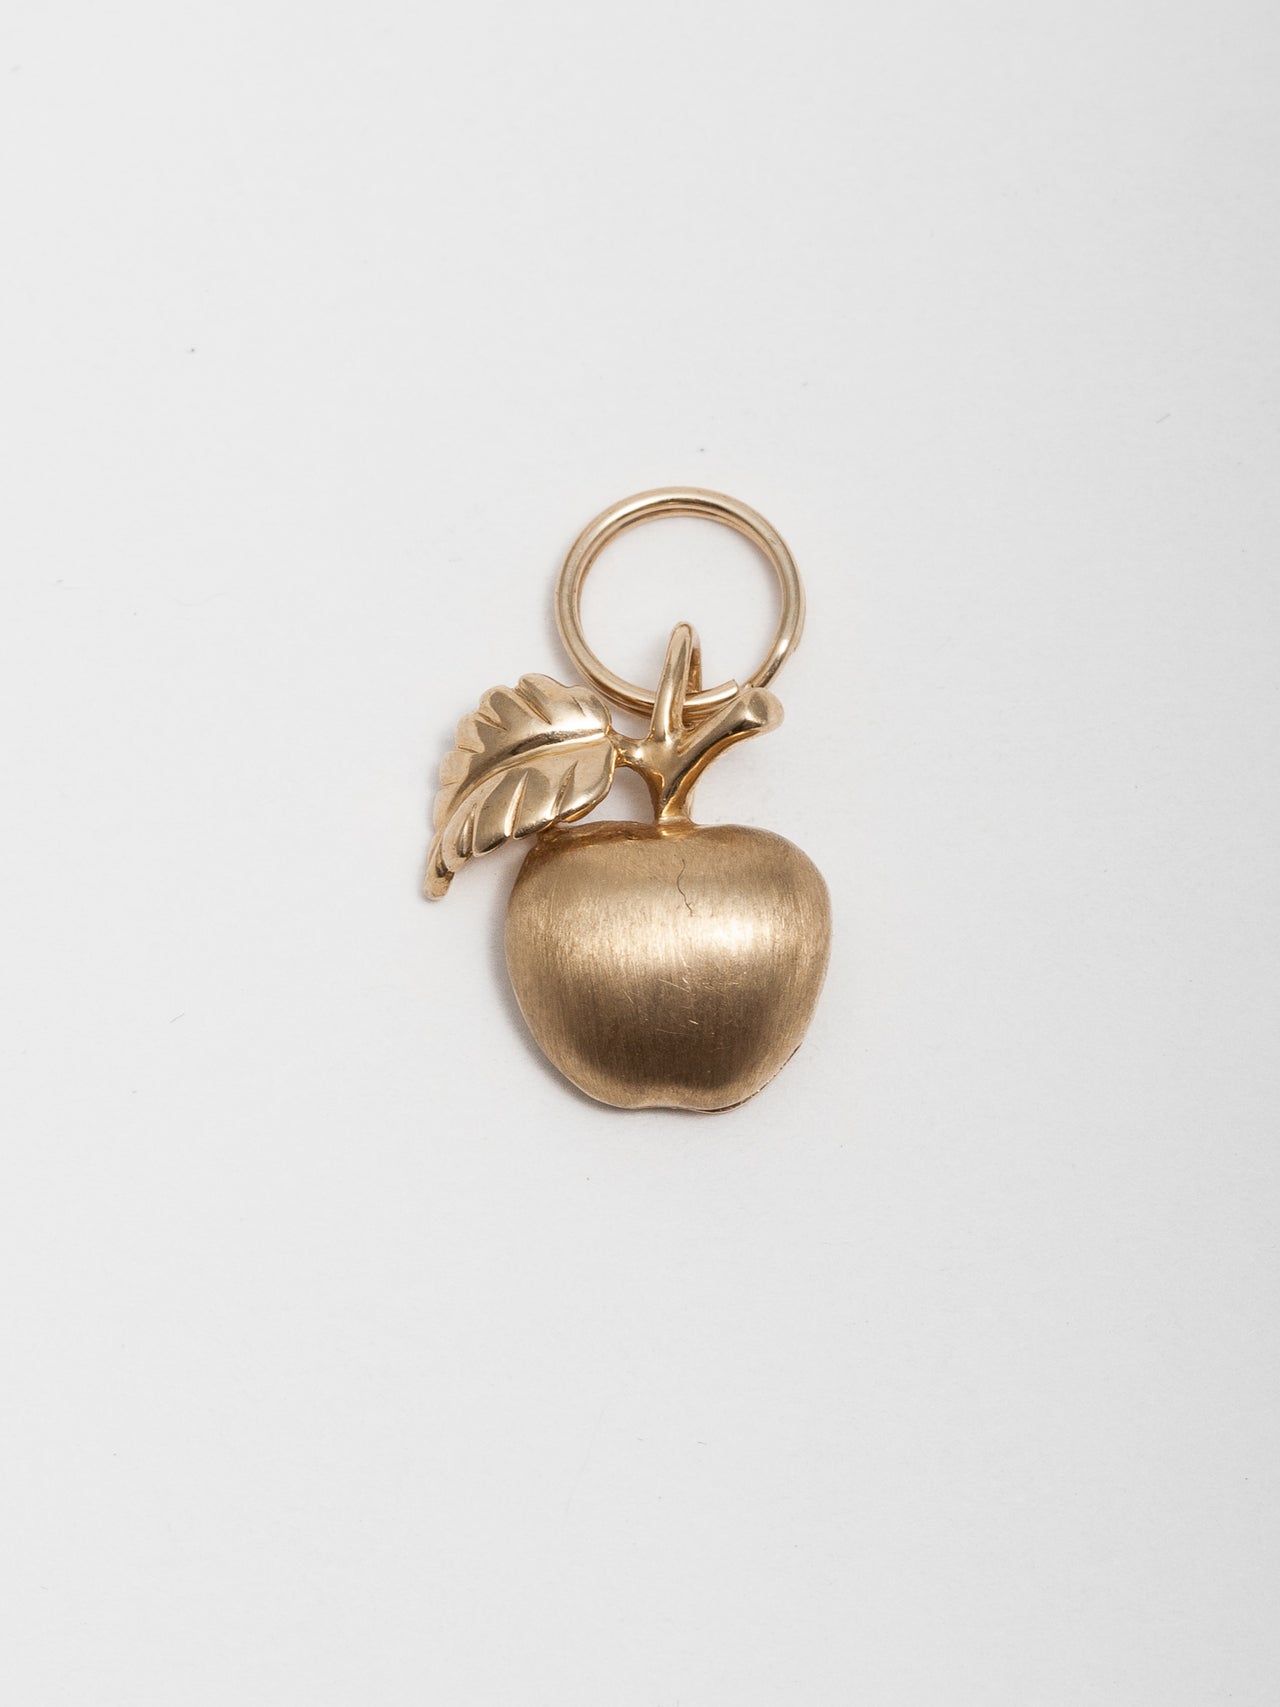 14Kt Yellow Gold Apple Charm pictured on light grey background. 